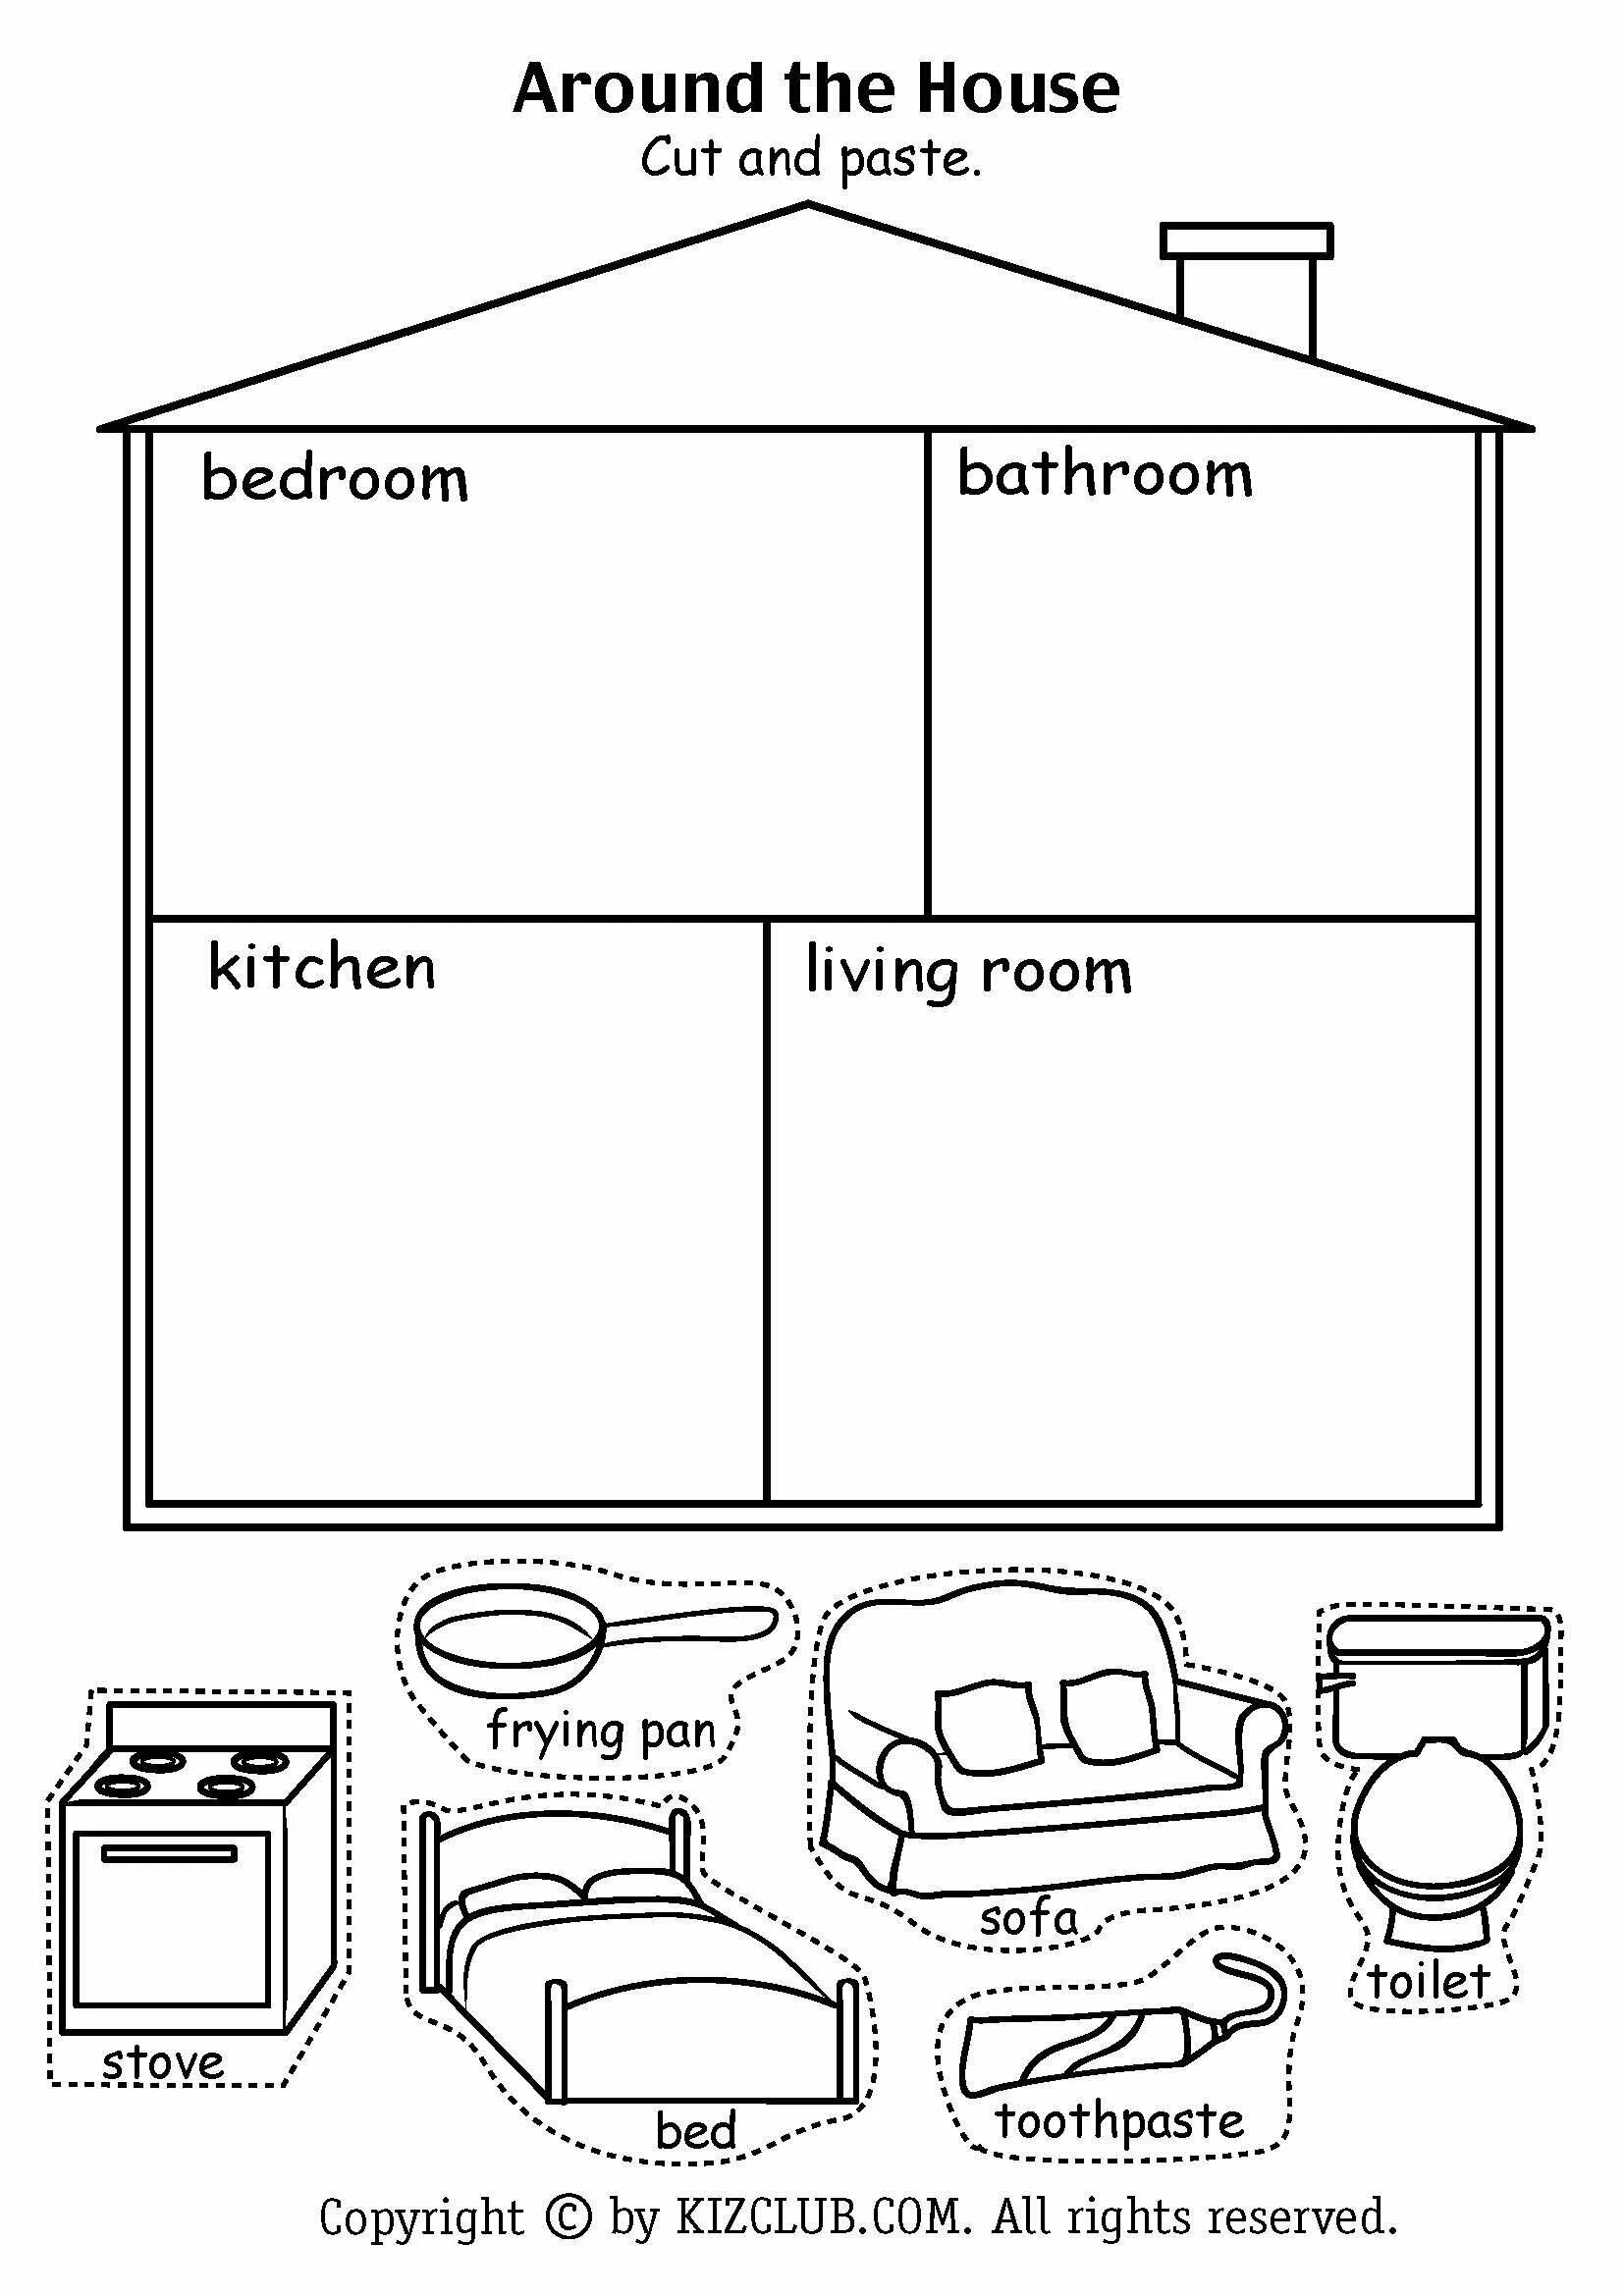 Английский язык Parts of the House kindergarden. Комнаты Worksheets for Kids. Rooms in the House задания. House задания для детей английский. My house english